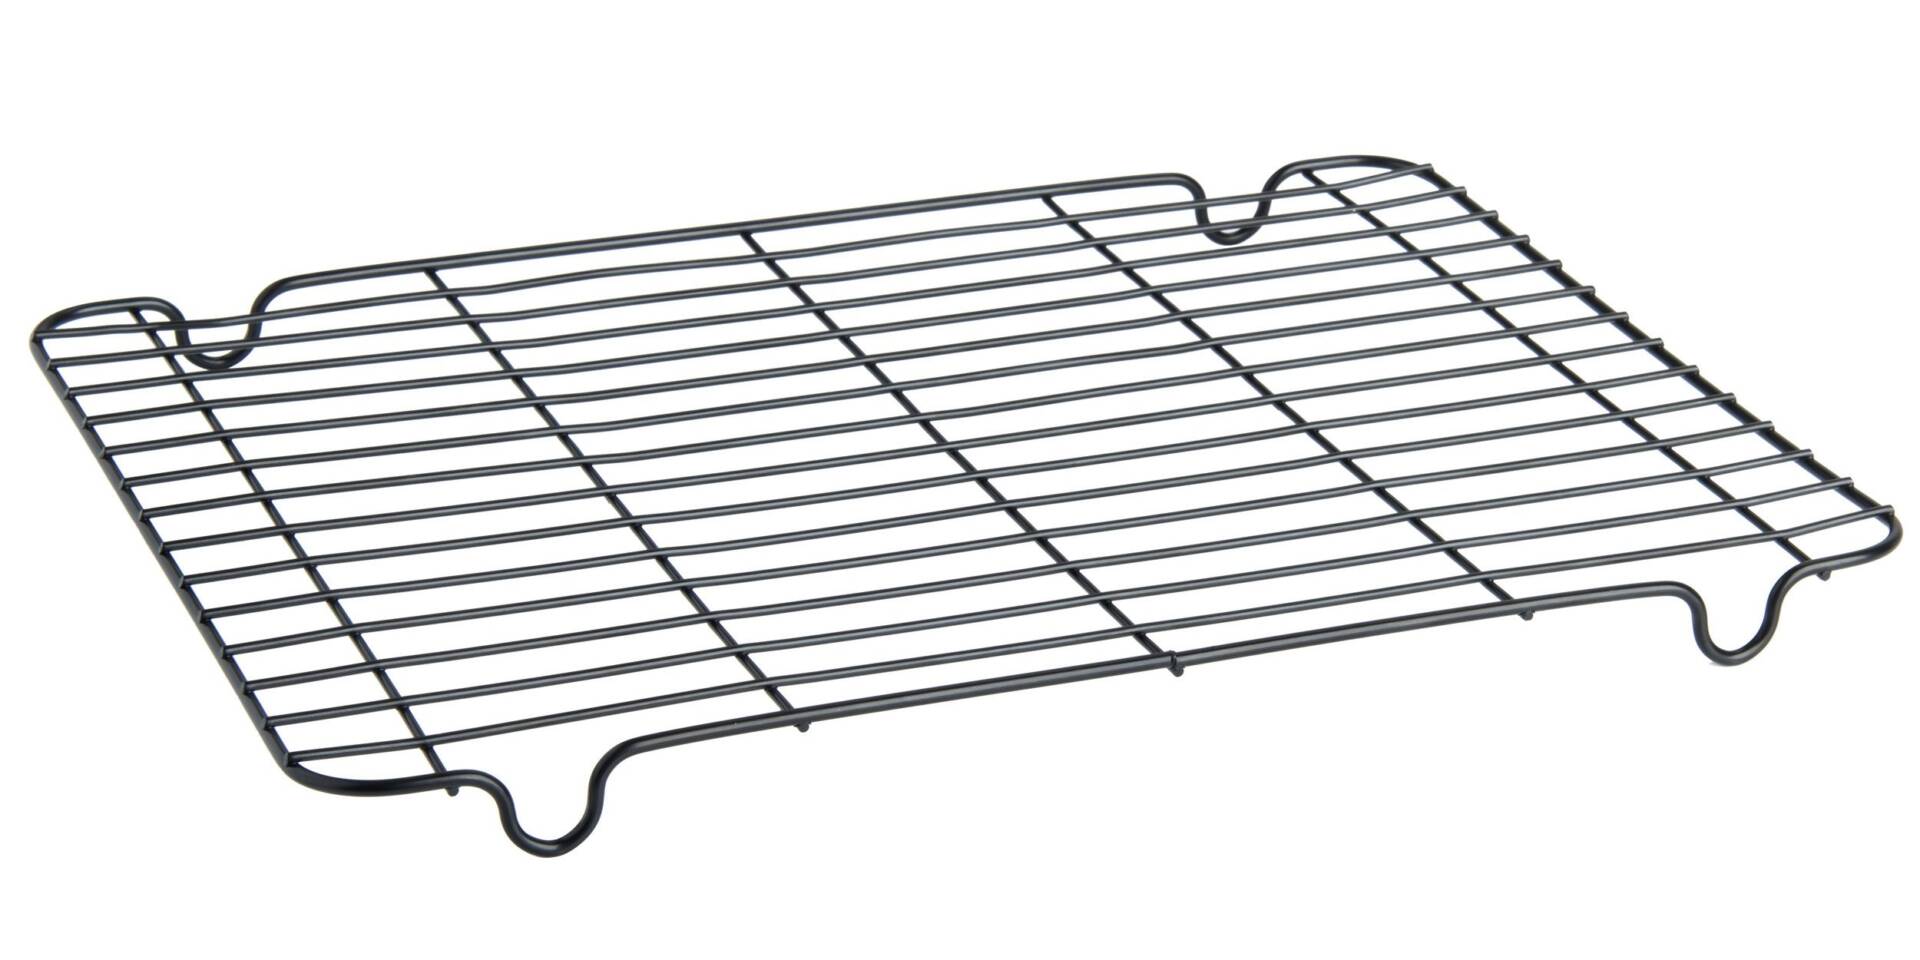 Project-Report-for-Cooling-Rack